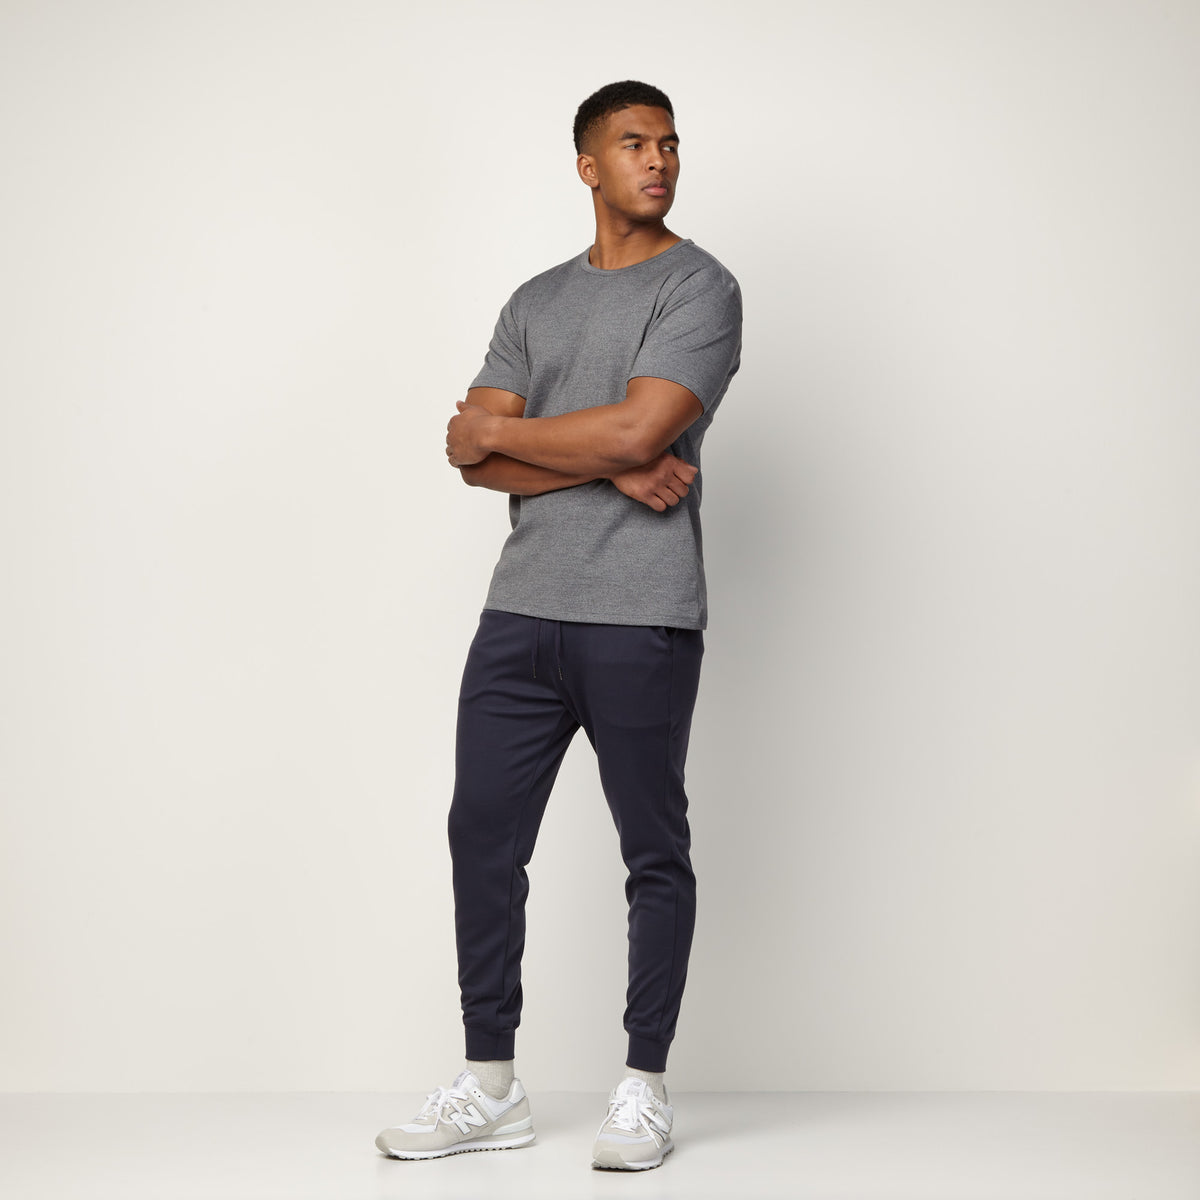 image-on-hover,model-spec: Micah is 6'1", 185 lbs, and wears size L